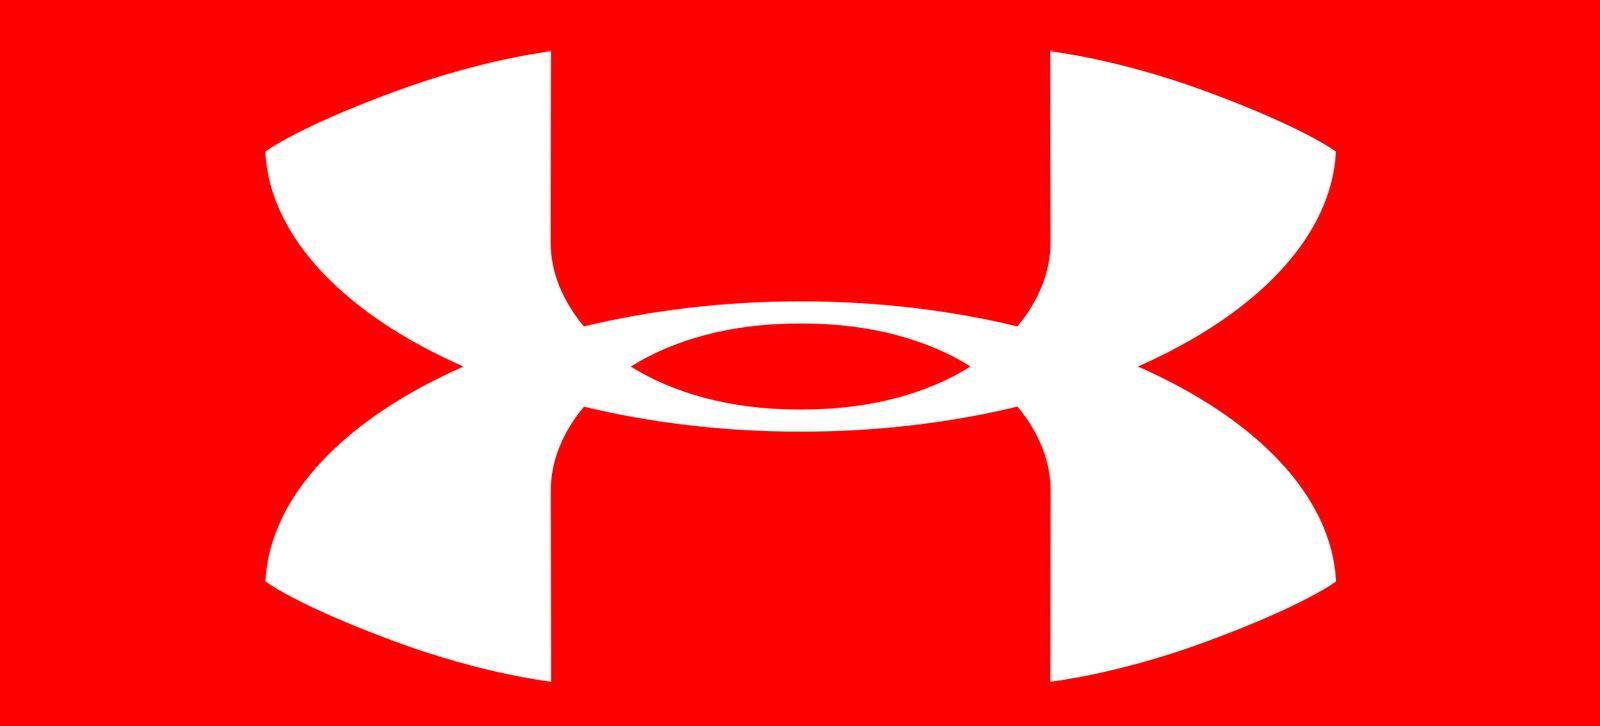 Black Under Armour Logo - Under Armour Logo, Under Armour Symbol, Meaning, History and Evolution